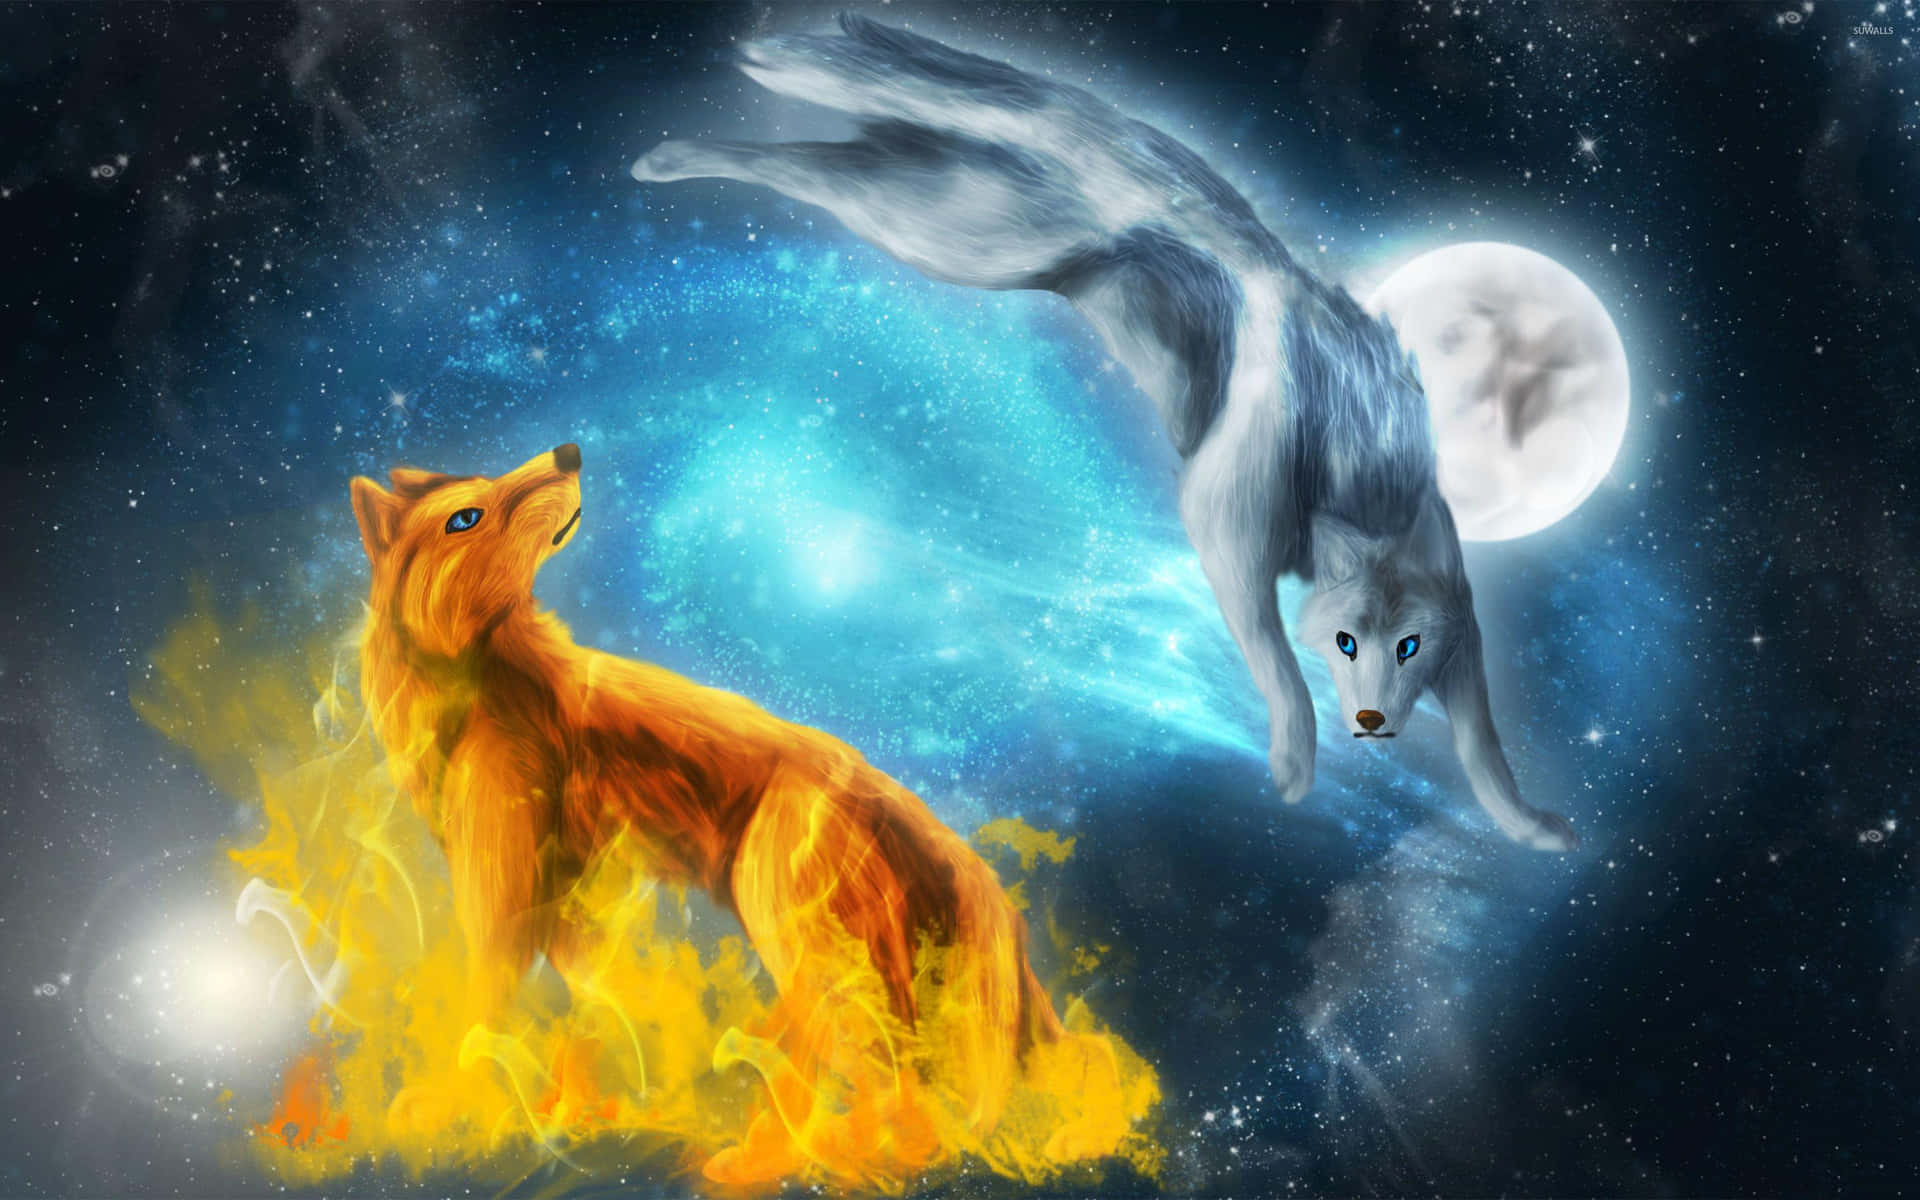 Fire and Ice Wolf With a Fierce Expression Wallpaper